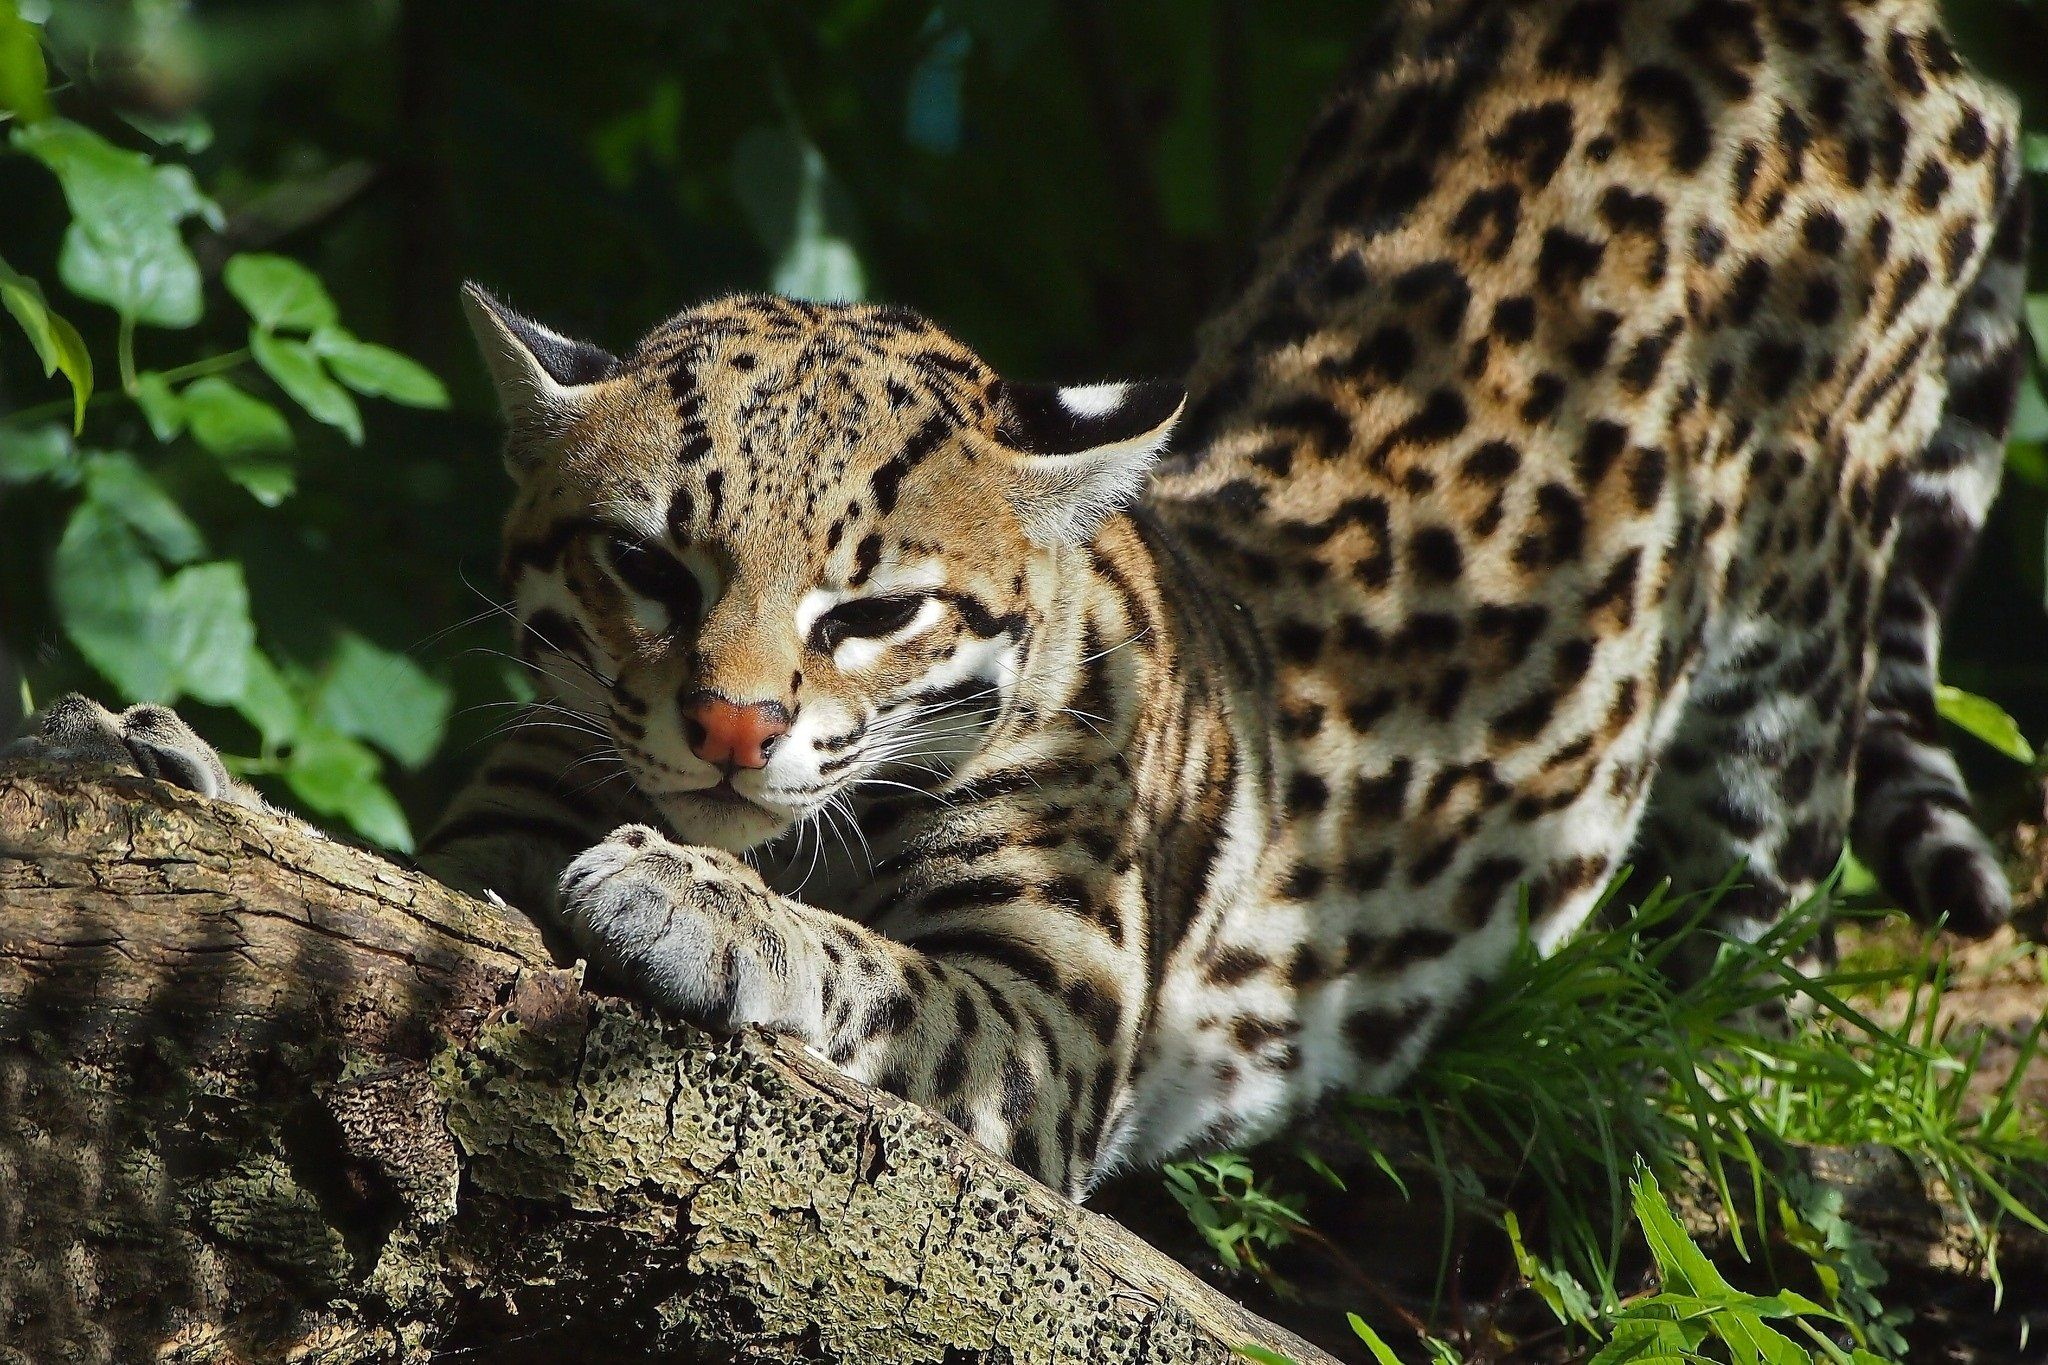 2048x1365 Ocelot | Animaux sauvages, Ocelot, Les chats sauvages